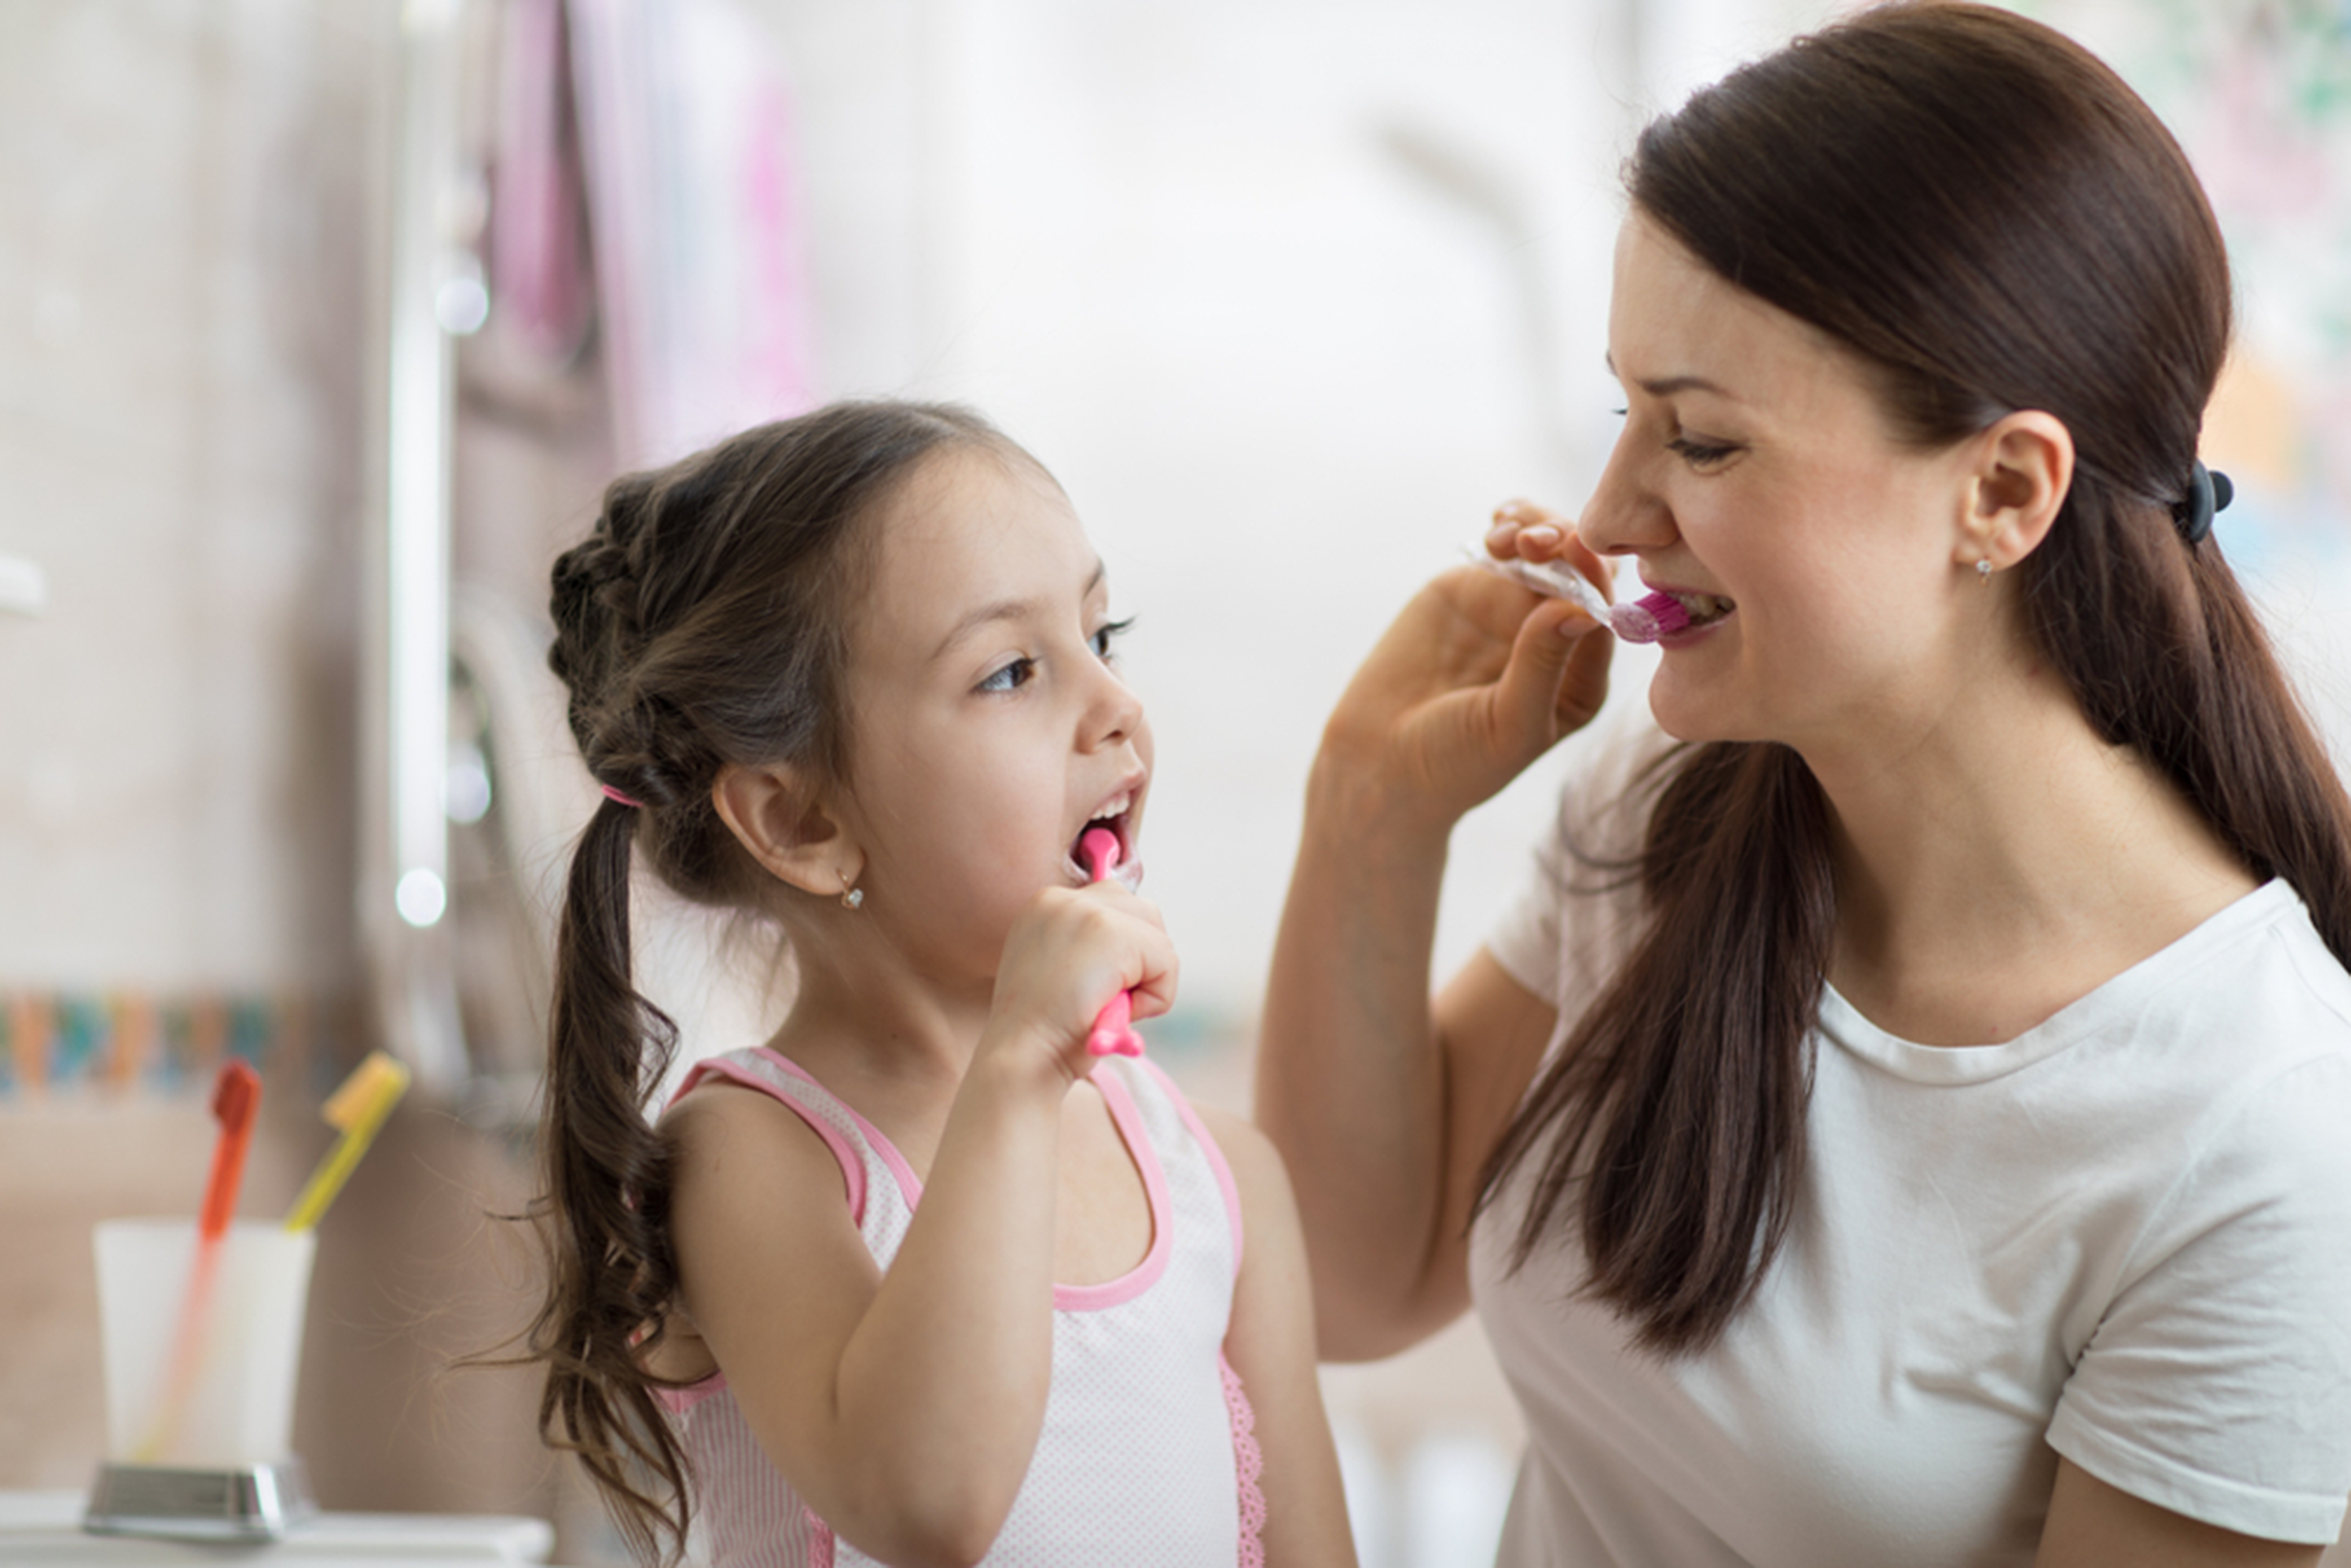 dental tips brushing your child or toddlers teeth